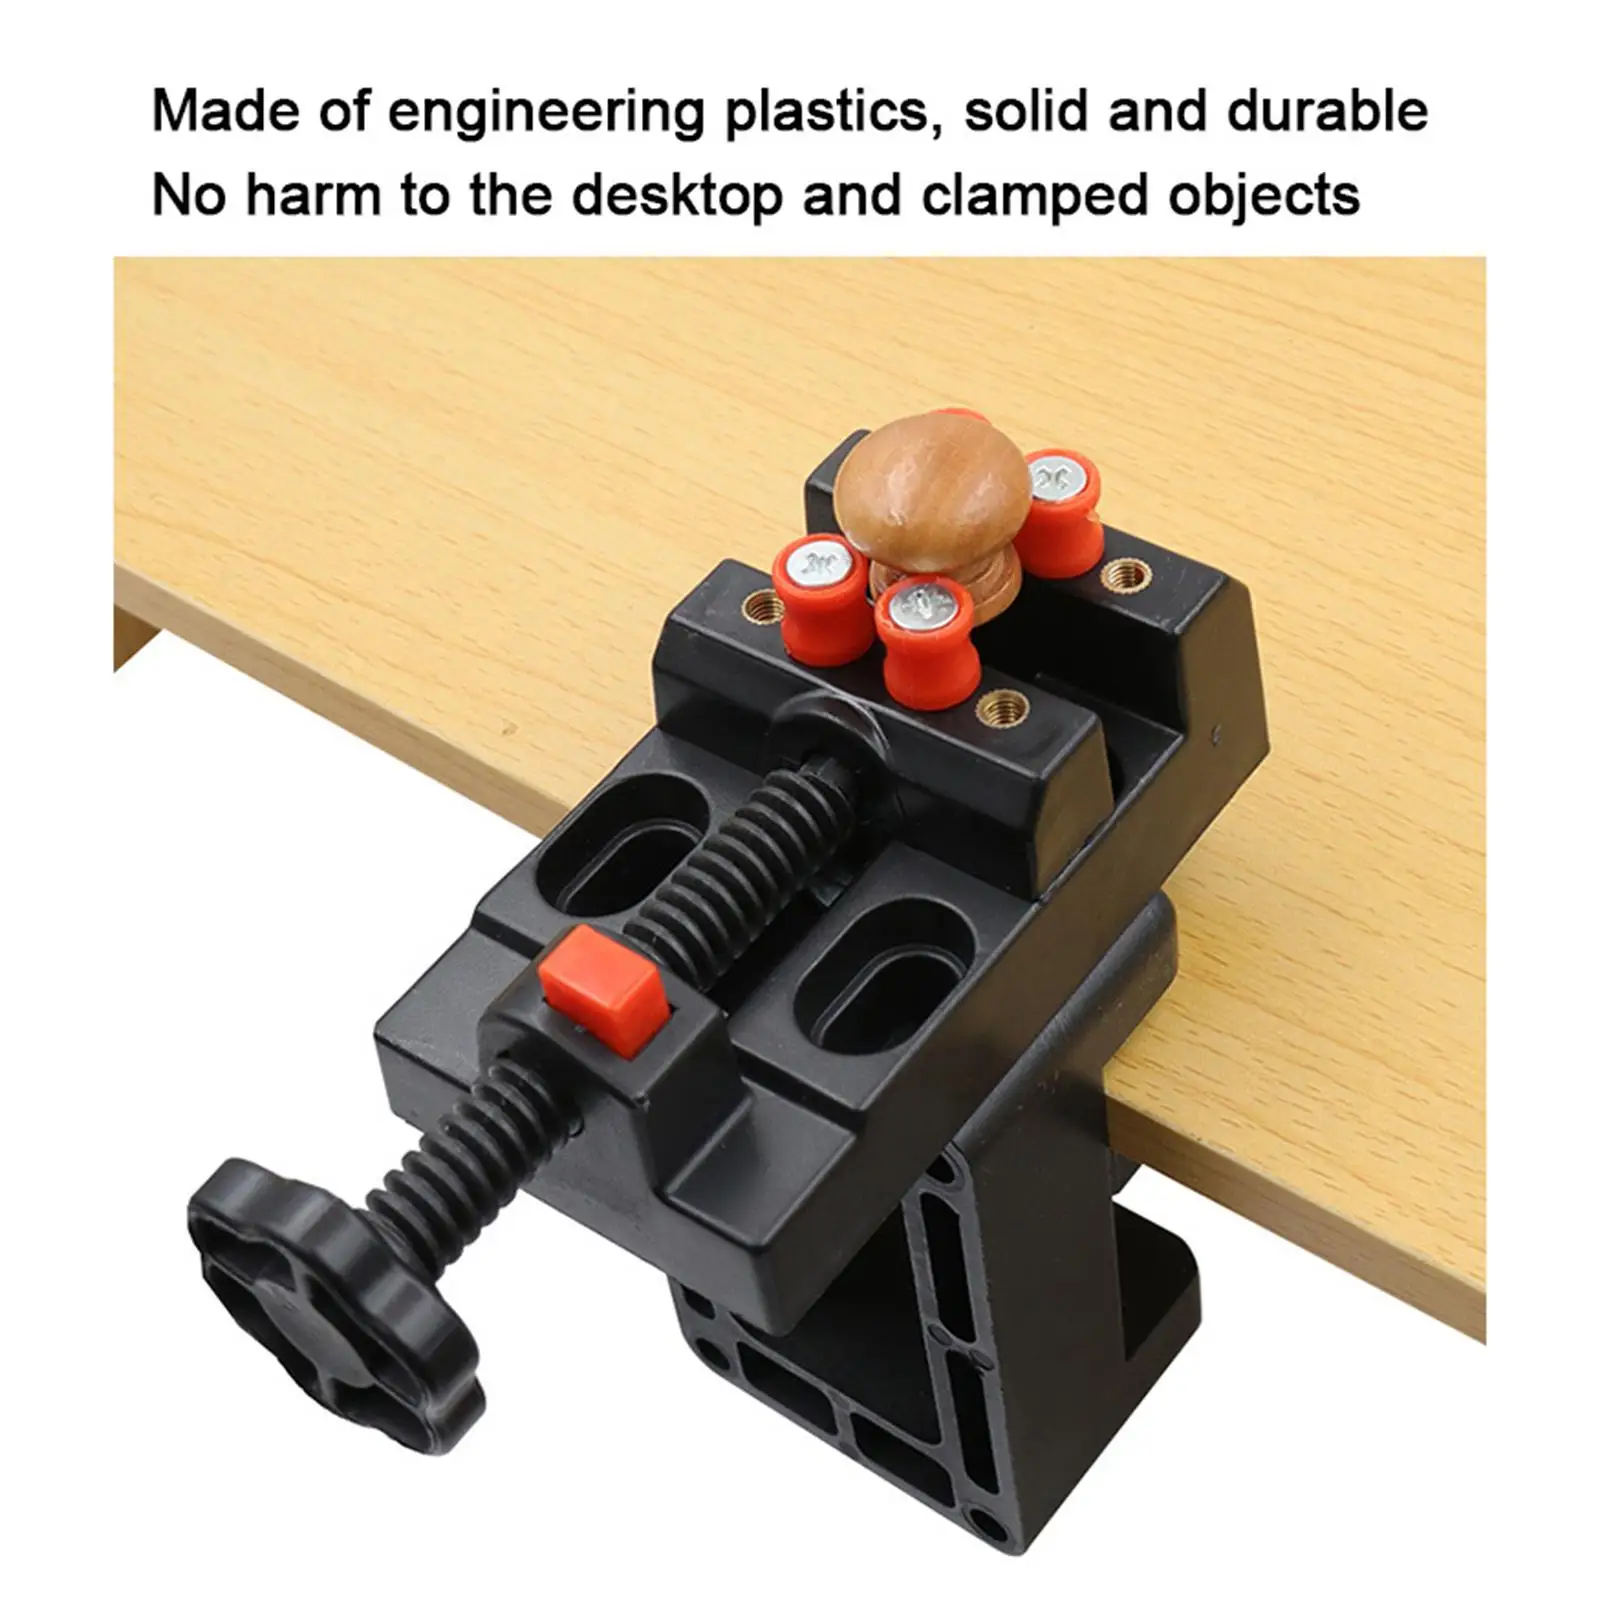 Portable Tabletop Clamp Vice for Jewelry Making Metalworking